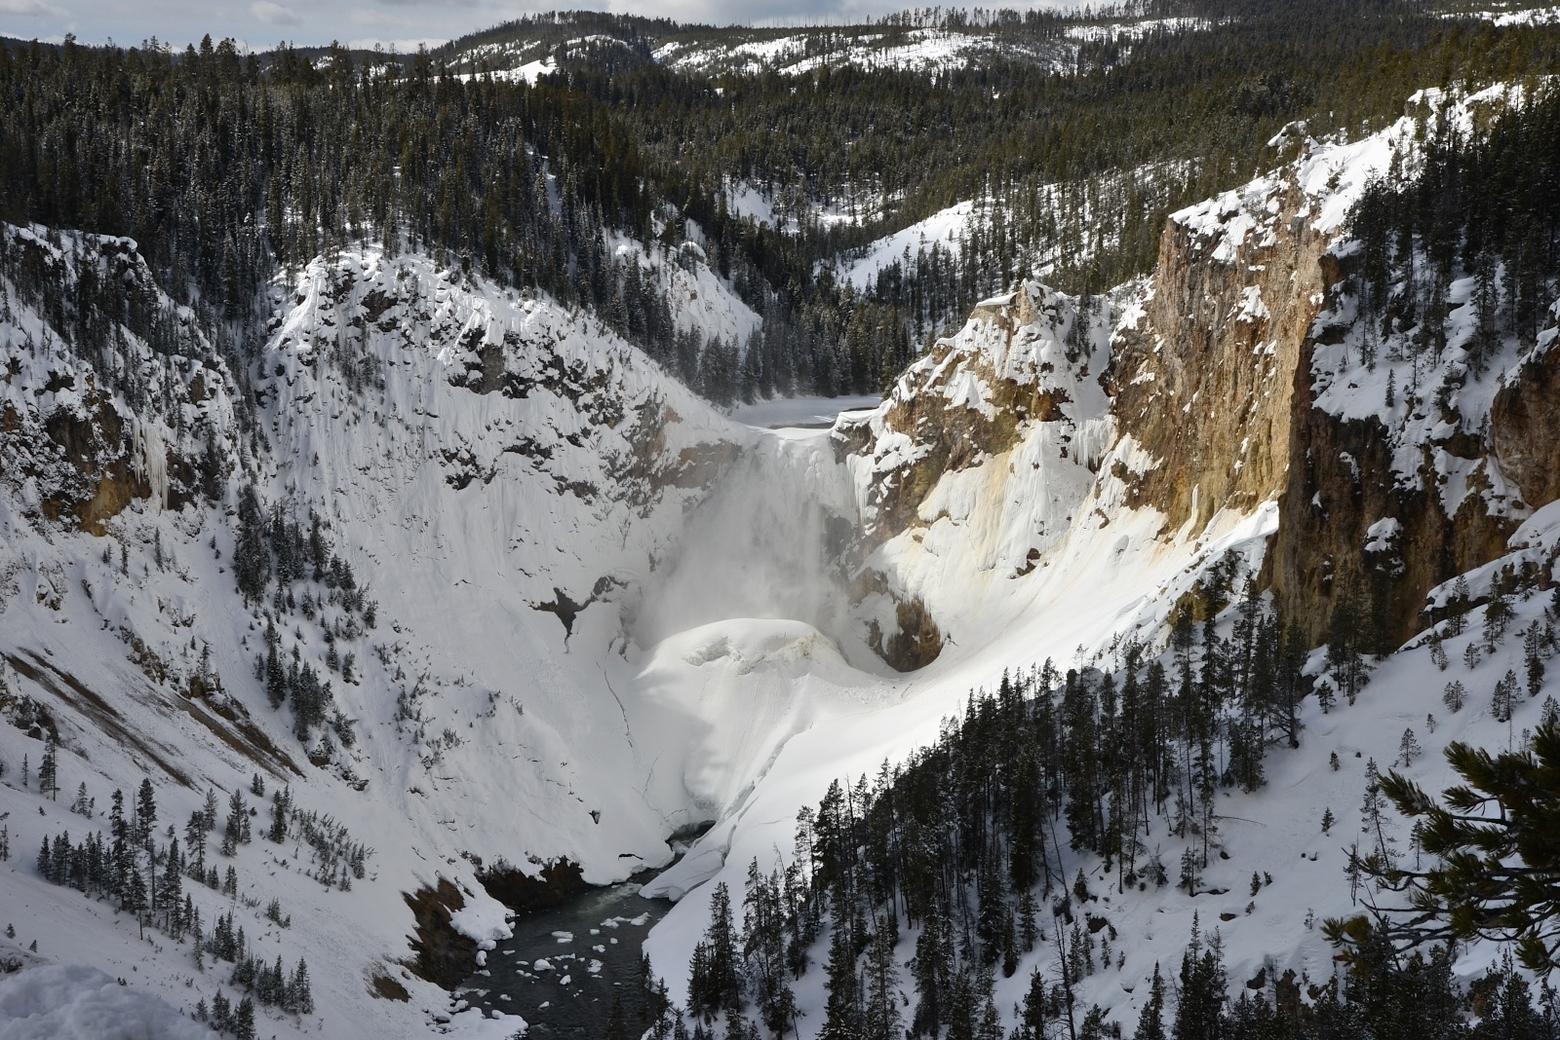 The Grand Canyon of the Yellowstone, a wonder of the world and not well understood even by those who visit America's first national park often. One of the most widely photographed scenes in Yellowstone, Fuller strives to avoid cliches with his interpretation of the Lower Falls. Photo by Steven Fuller